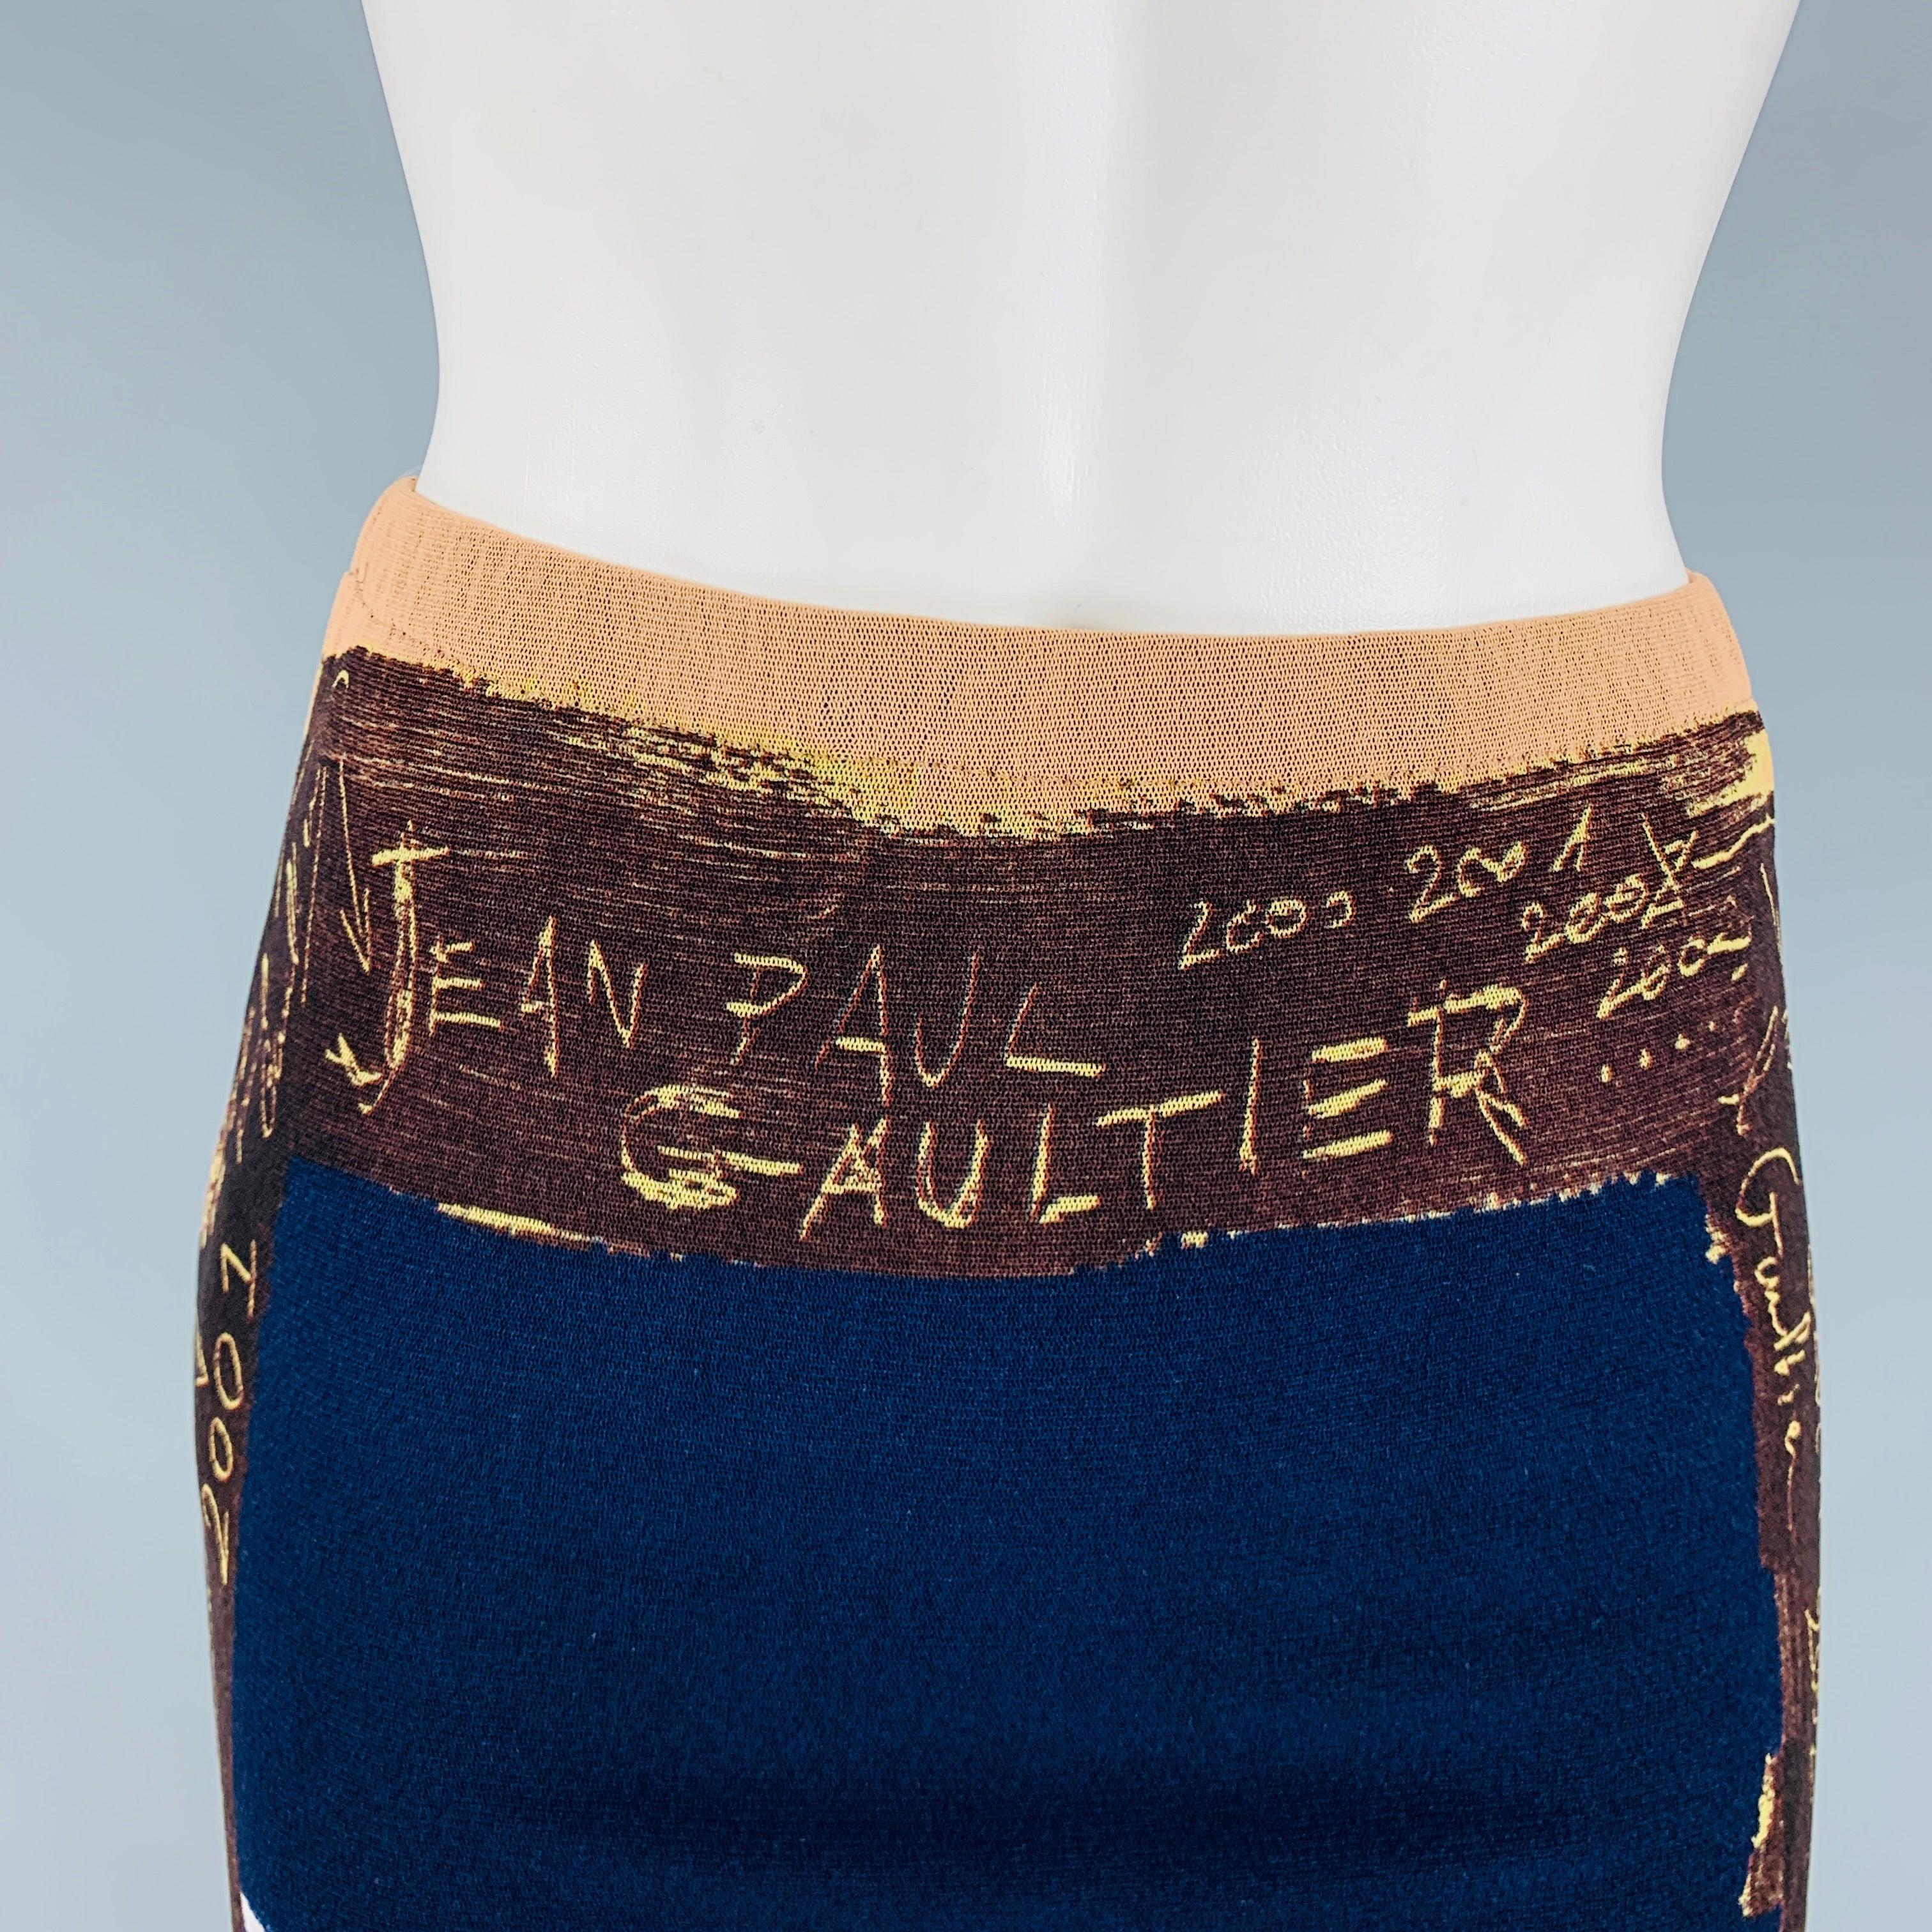 JEAN PAUL GAULTIER 
SS 2001 Graffiti Collectors skirt comes in a navy and multicolor nylon mesh knit material featuring a pencil style. Made in Italy.Excellent Pre-Owned Condition. 

Marked:   M 

Measurements: 
  Waist: 25 inches Hip: 30 inches